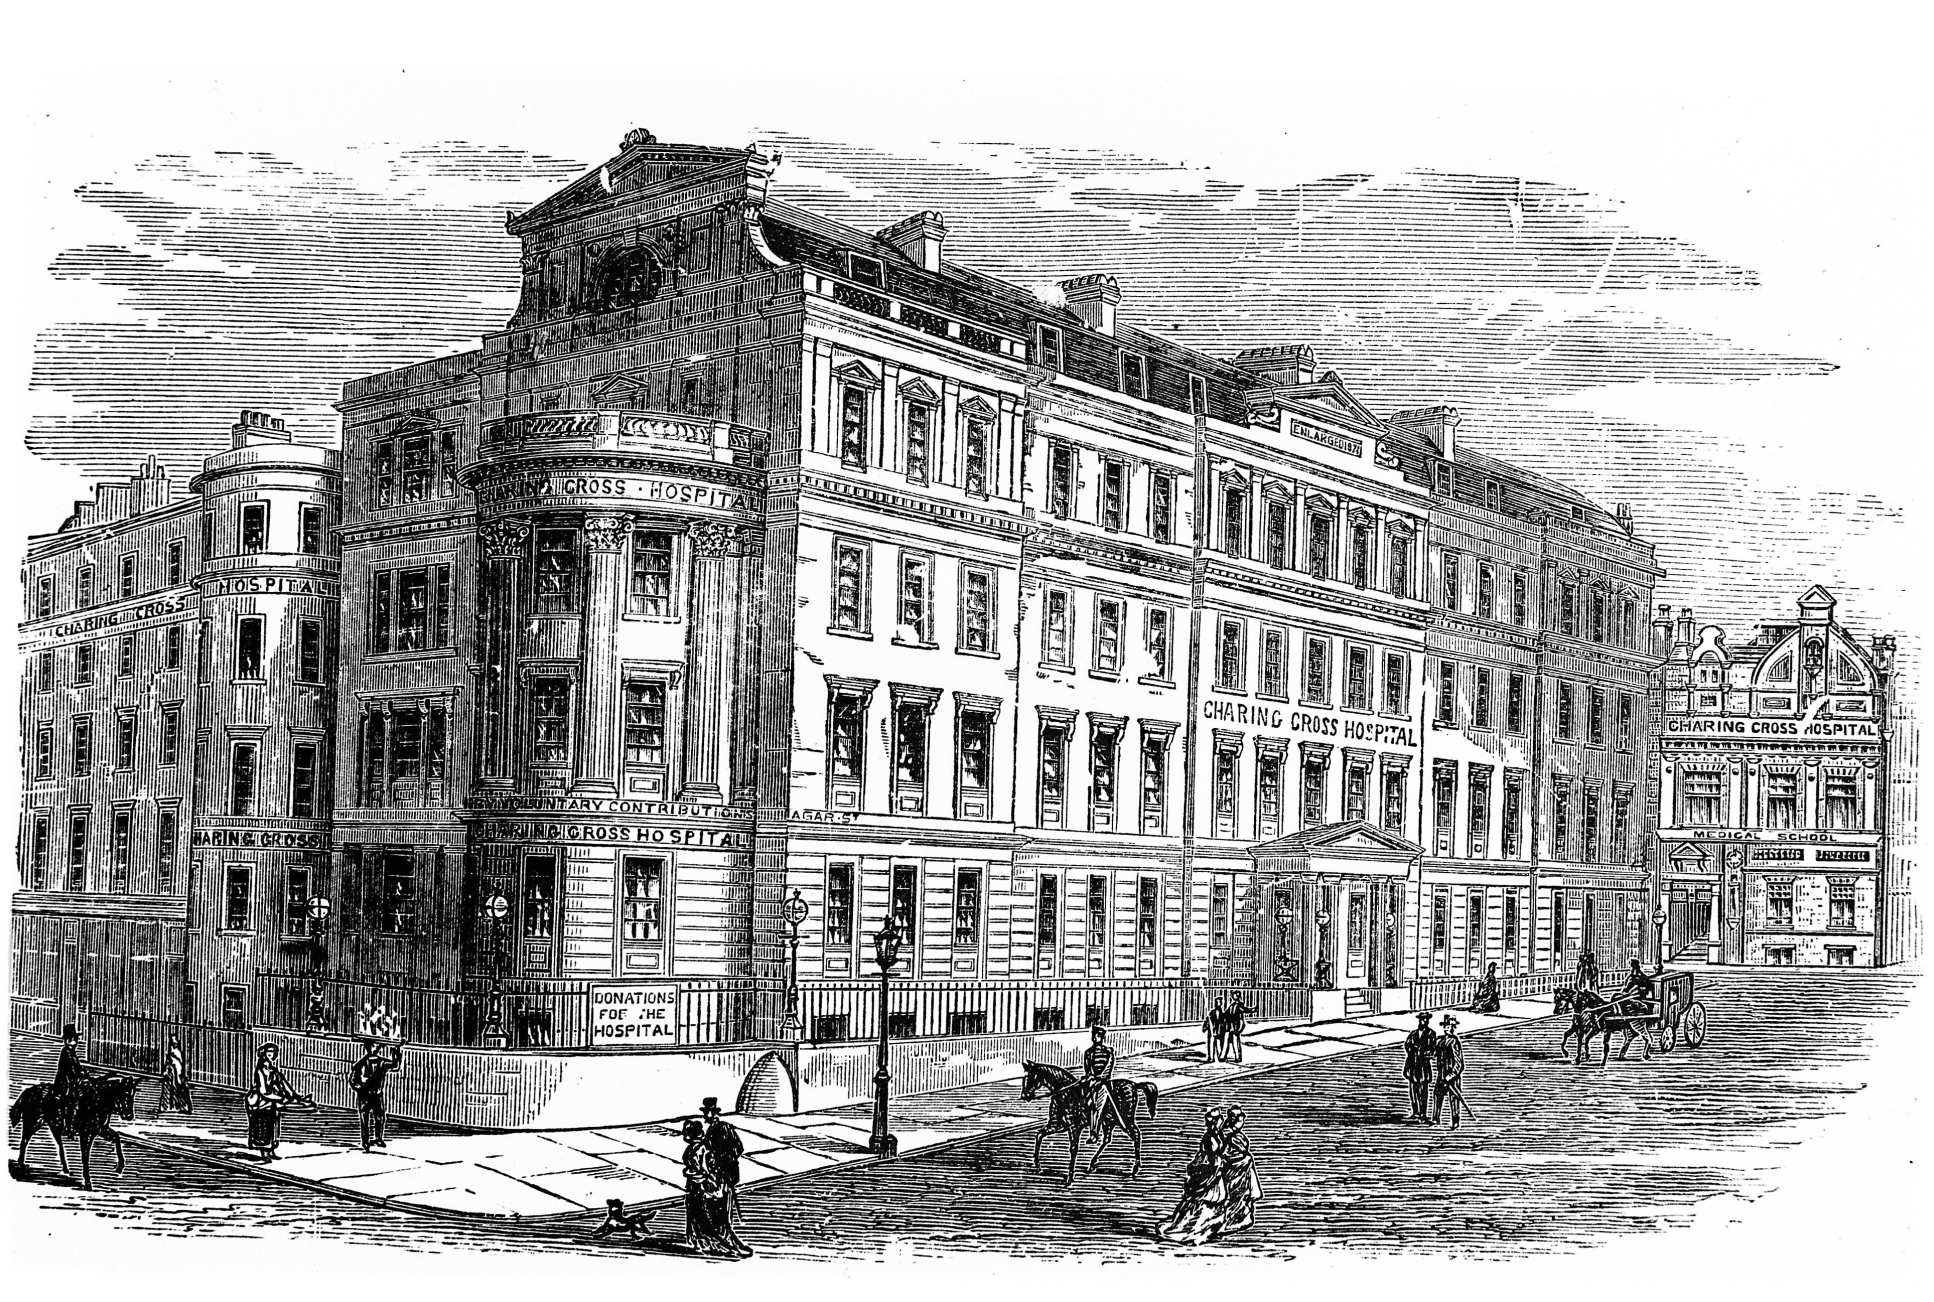 Charing Cross Hospital in 19th century